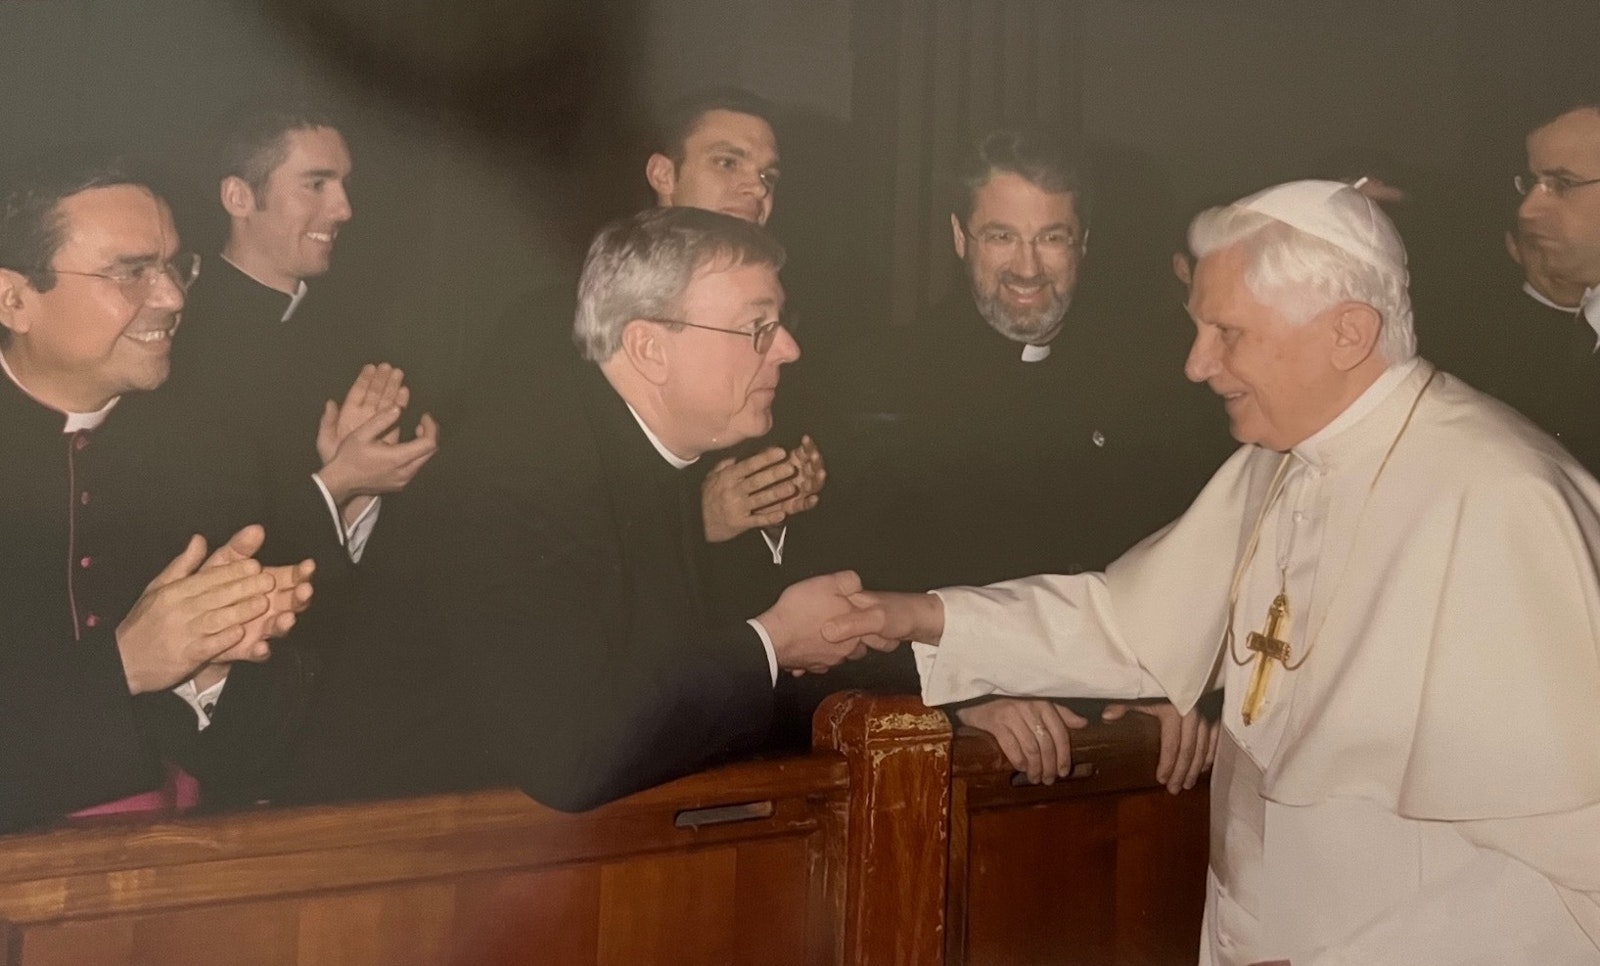 Msgr. Charles Kosanke, pastor and rector of the Basilica of Ste. Anne in Detroit, recalls meeting Pope Benedict twice: the first time in 1991, when the pope was still known as Cardinal Ratzinger, and the second shortly after his elevation to the papacy in 2005. (Courtesy of Msgr. Charles Kosanke)